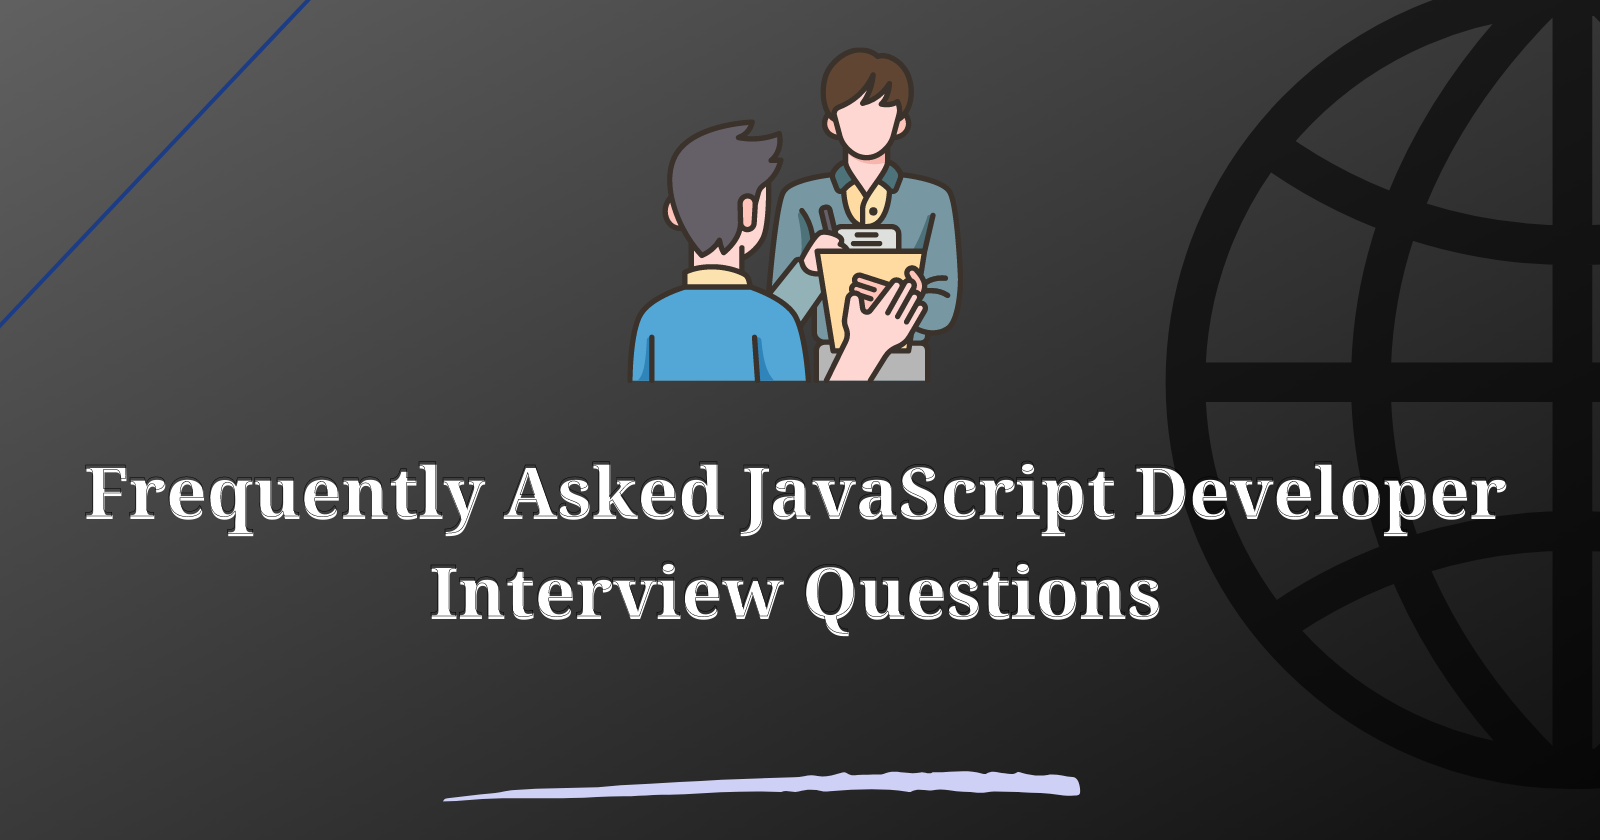 Frequently Asked JavaScript Developer Interview Questions